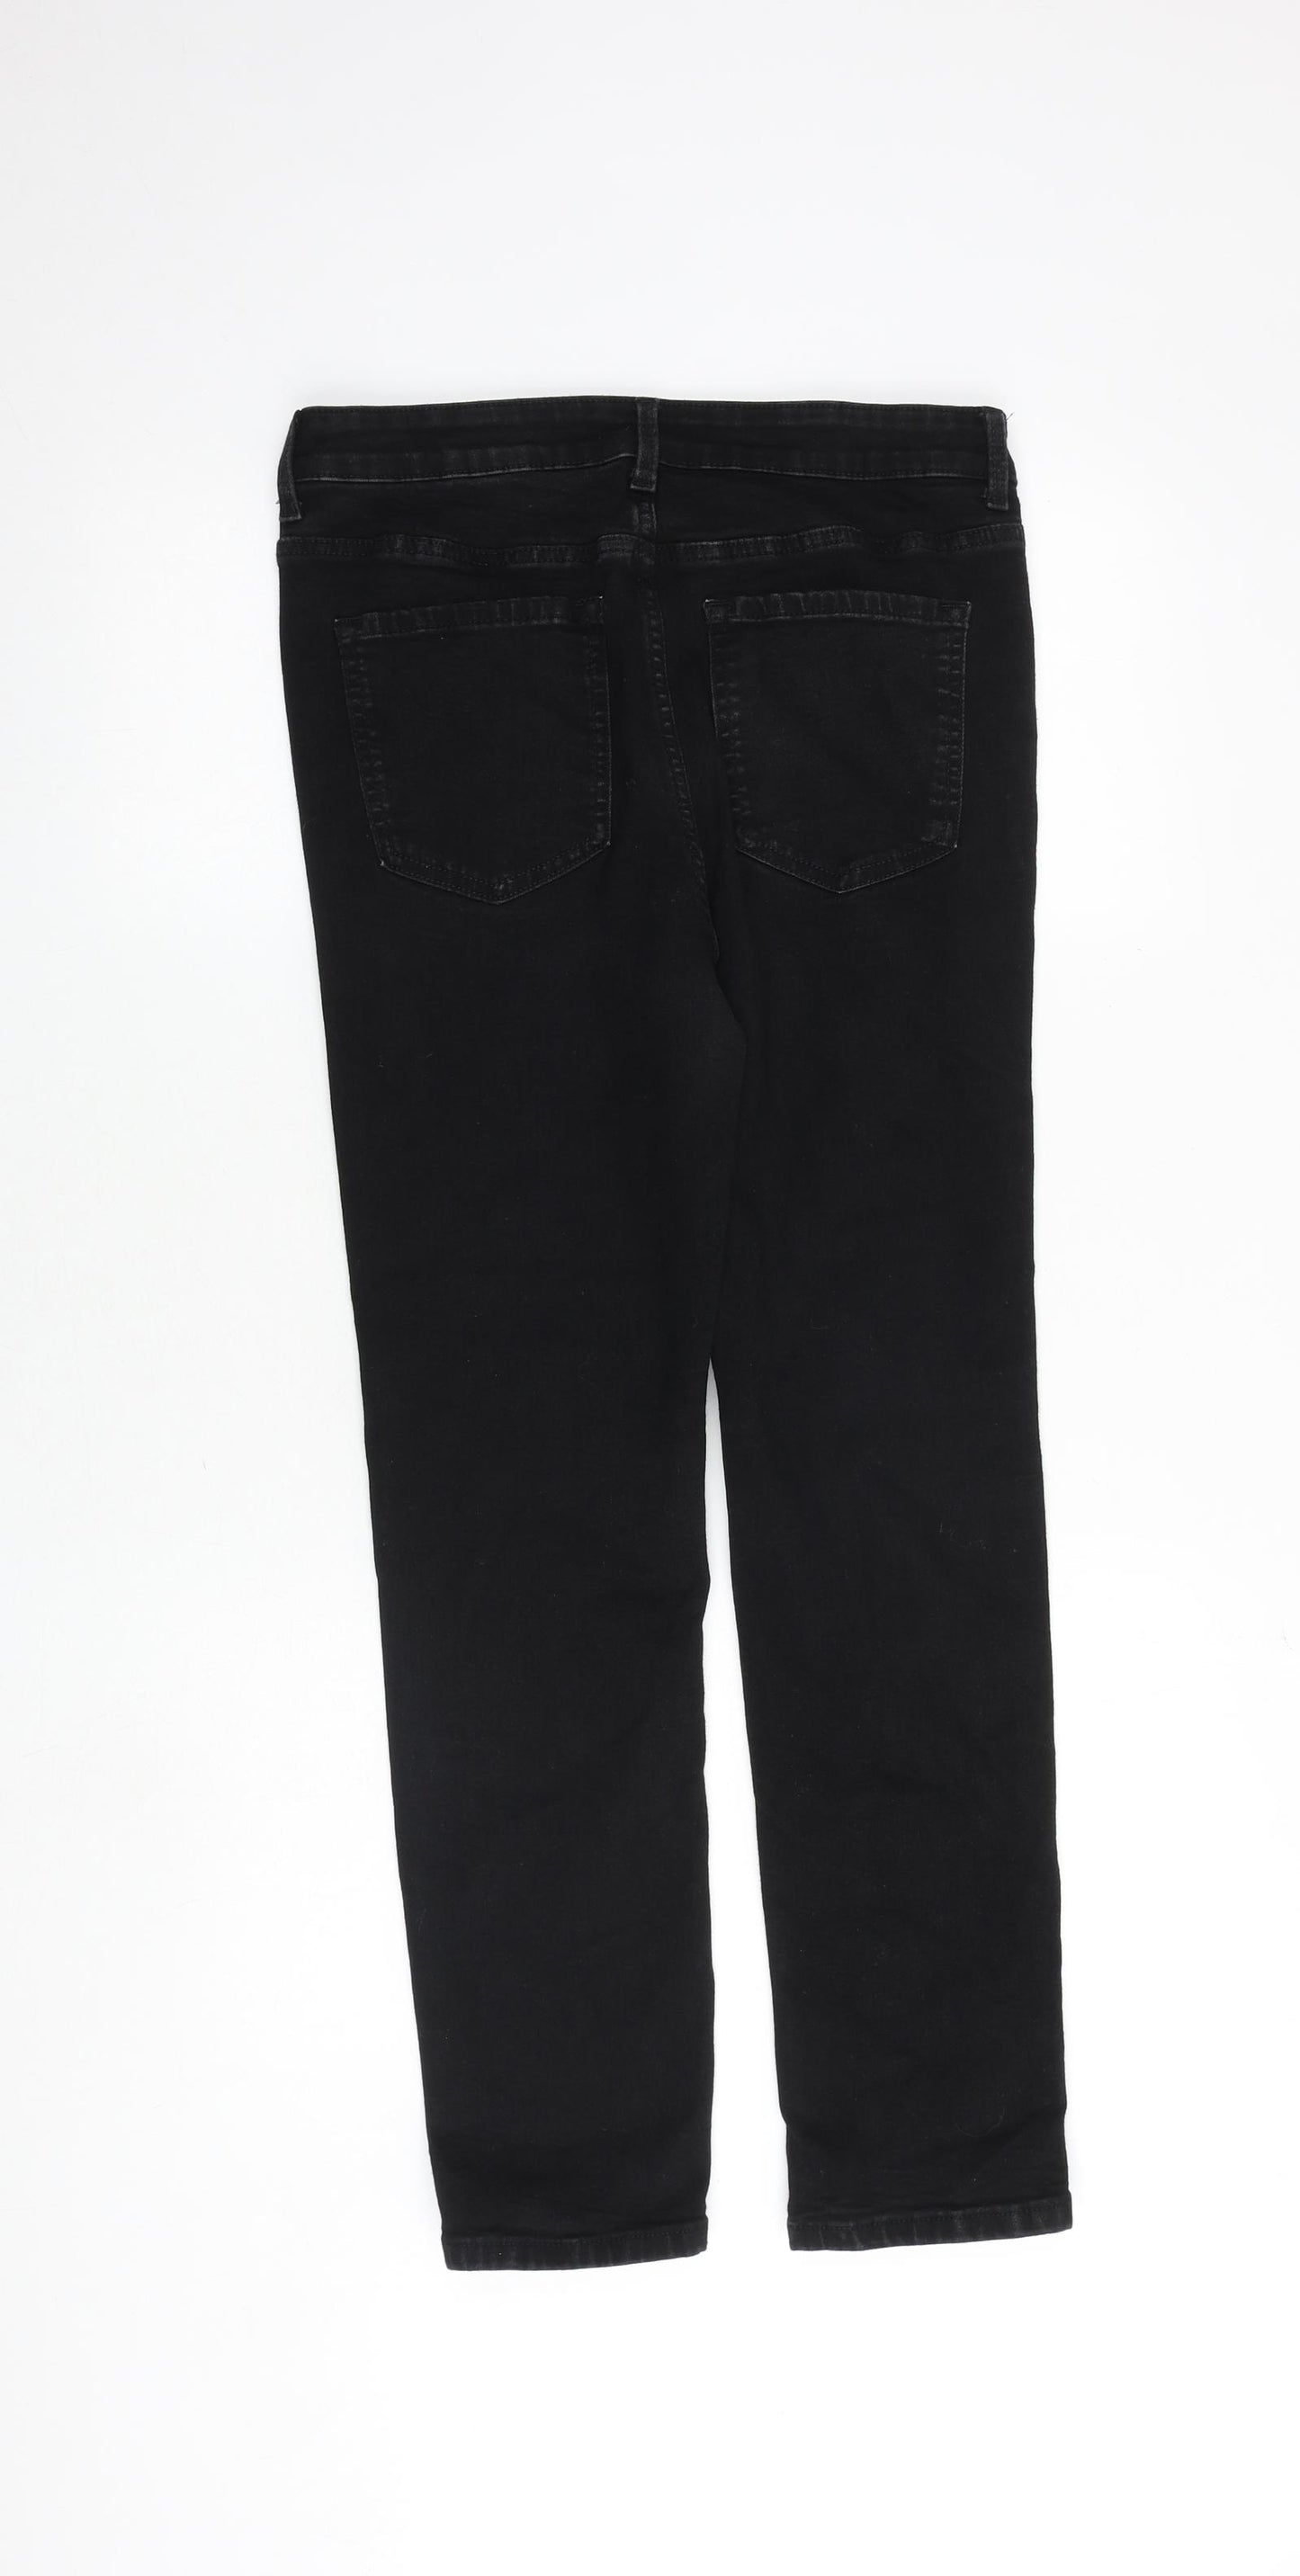 Marks and Spencer Womens Black Cotton Skinny Jeans Size 12 Slim Zip